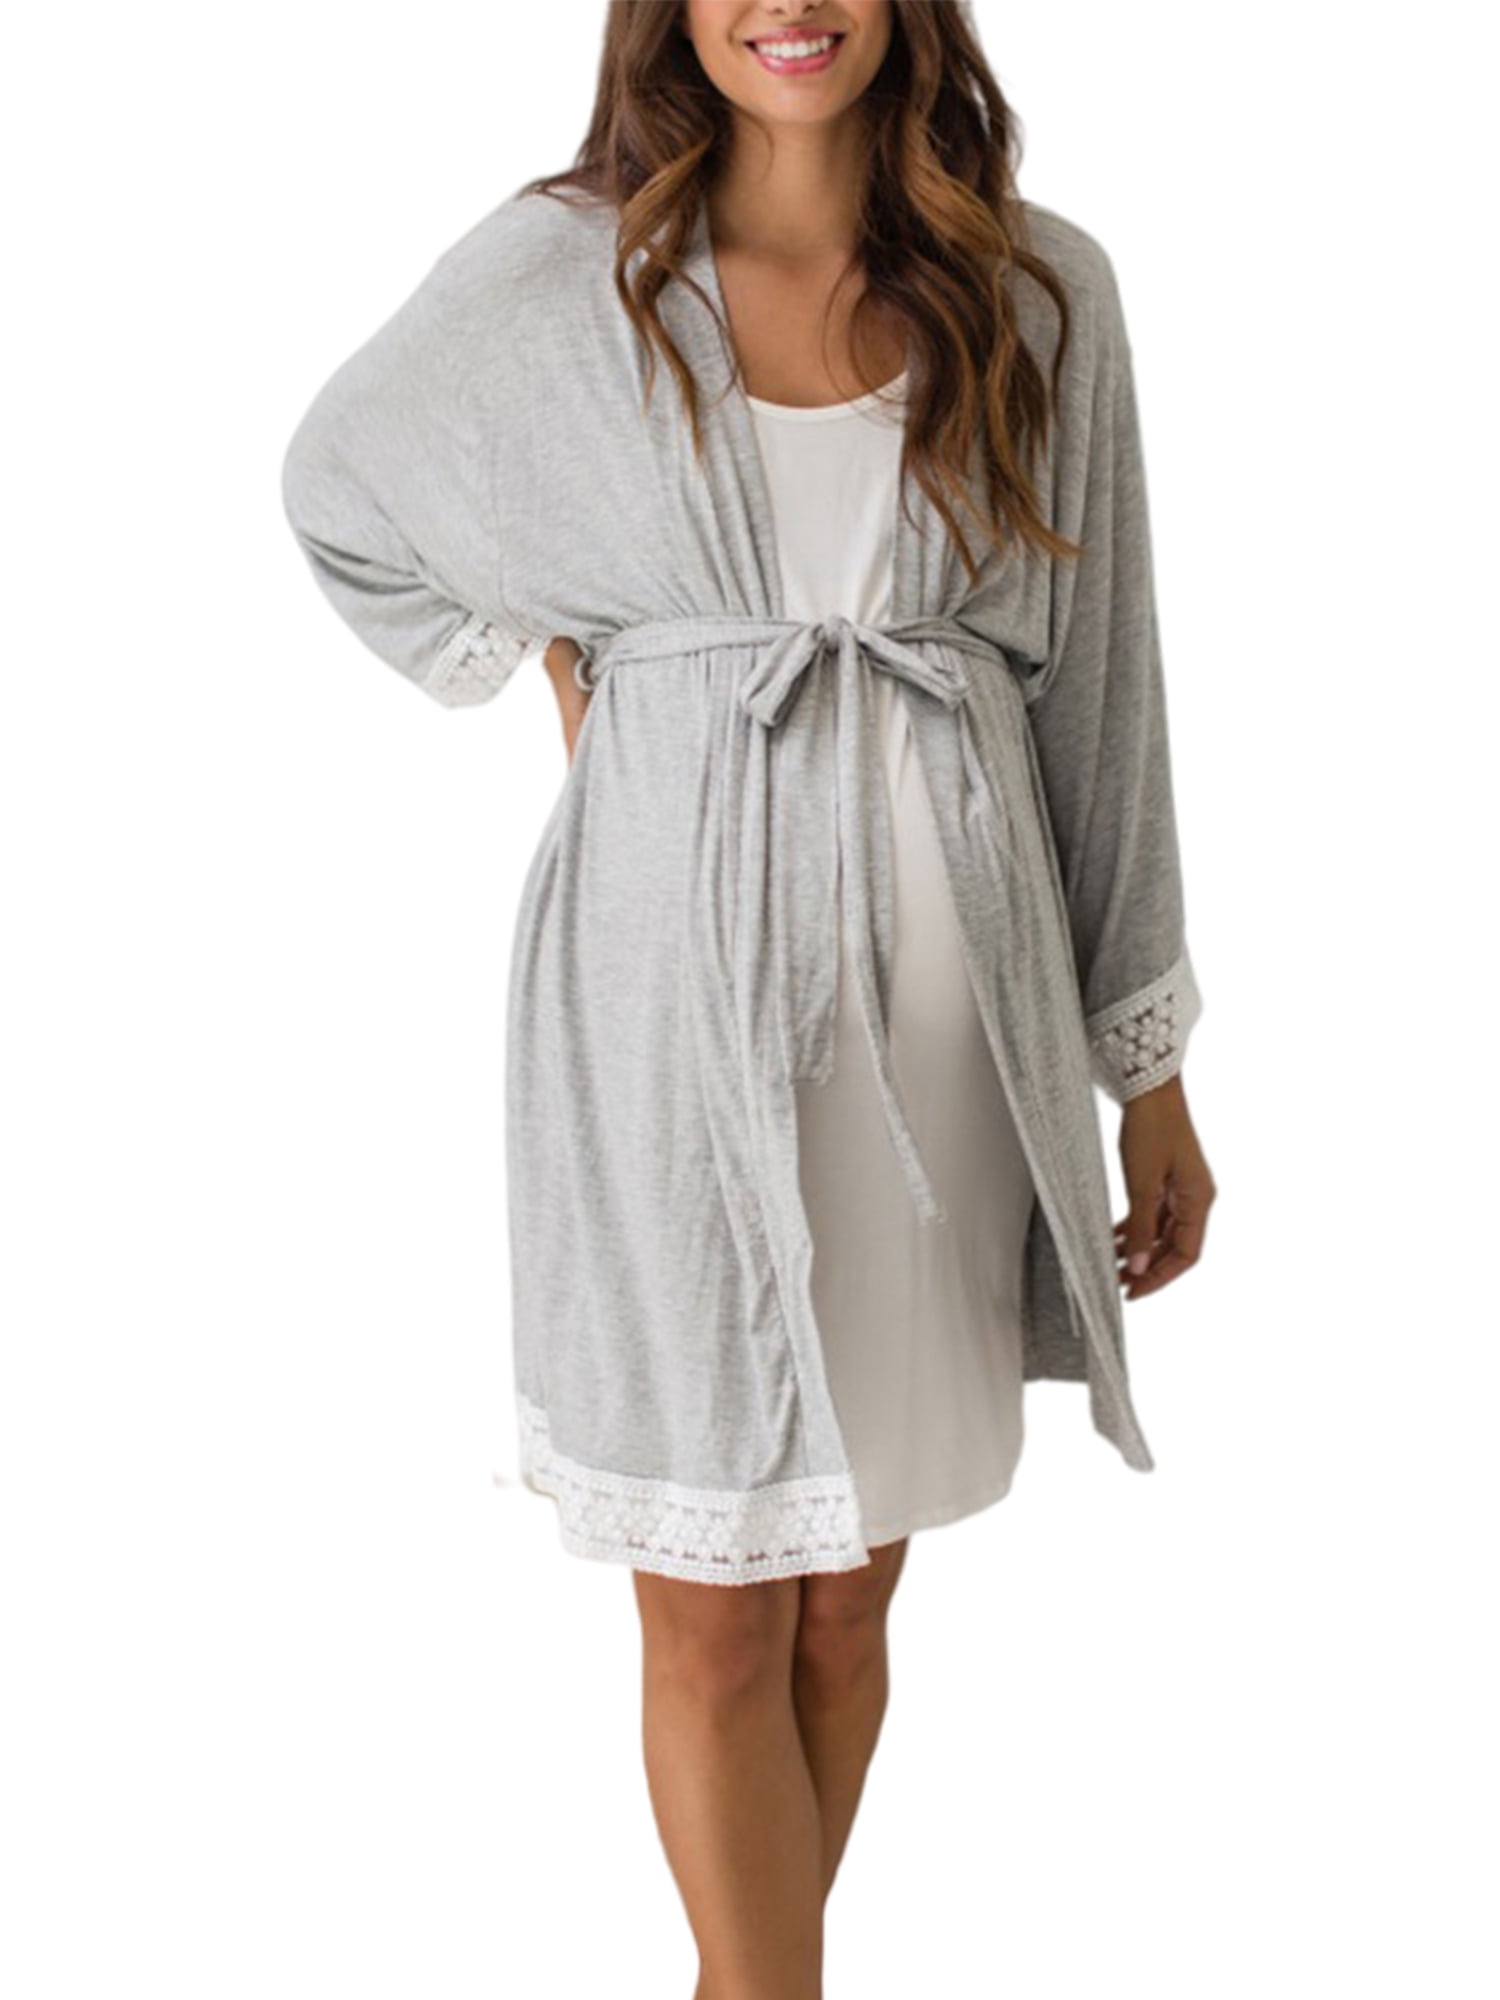 Skims Synthetic Knit Cozy Robe in Onyx Black robe dresses and bathrobes Womens Clothing Nightwear and sleepwear Robes 